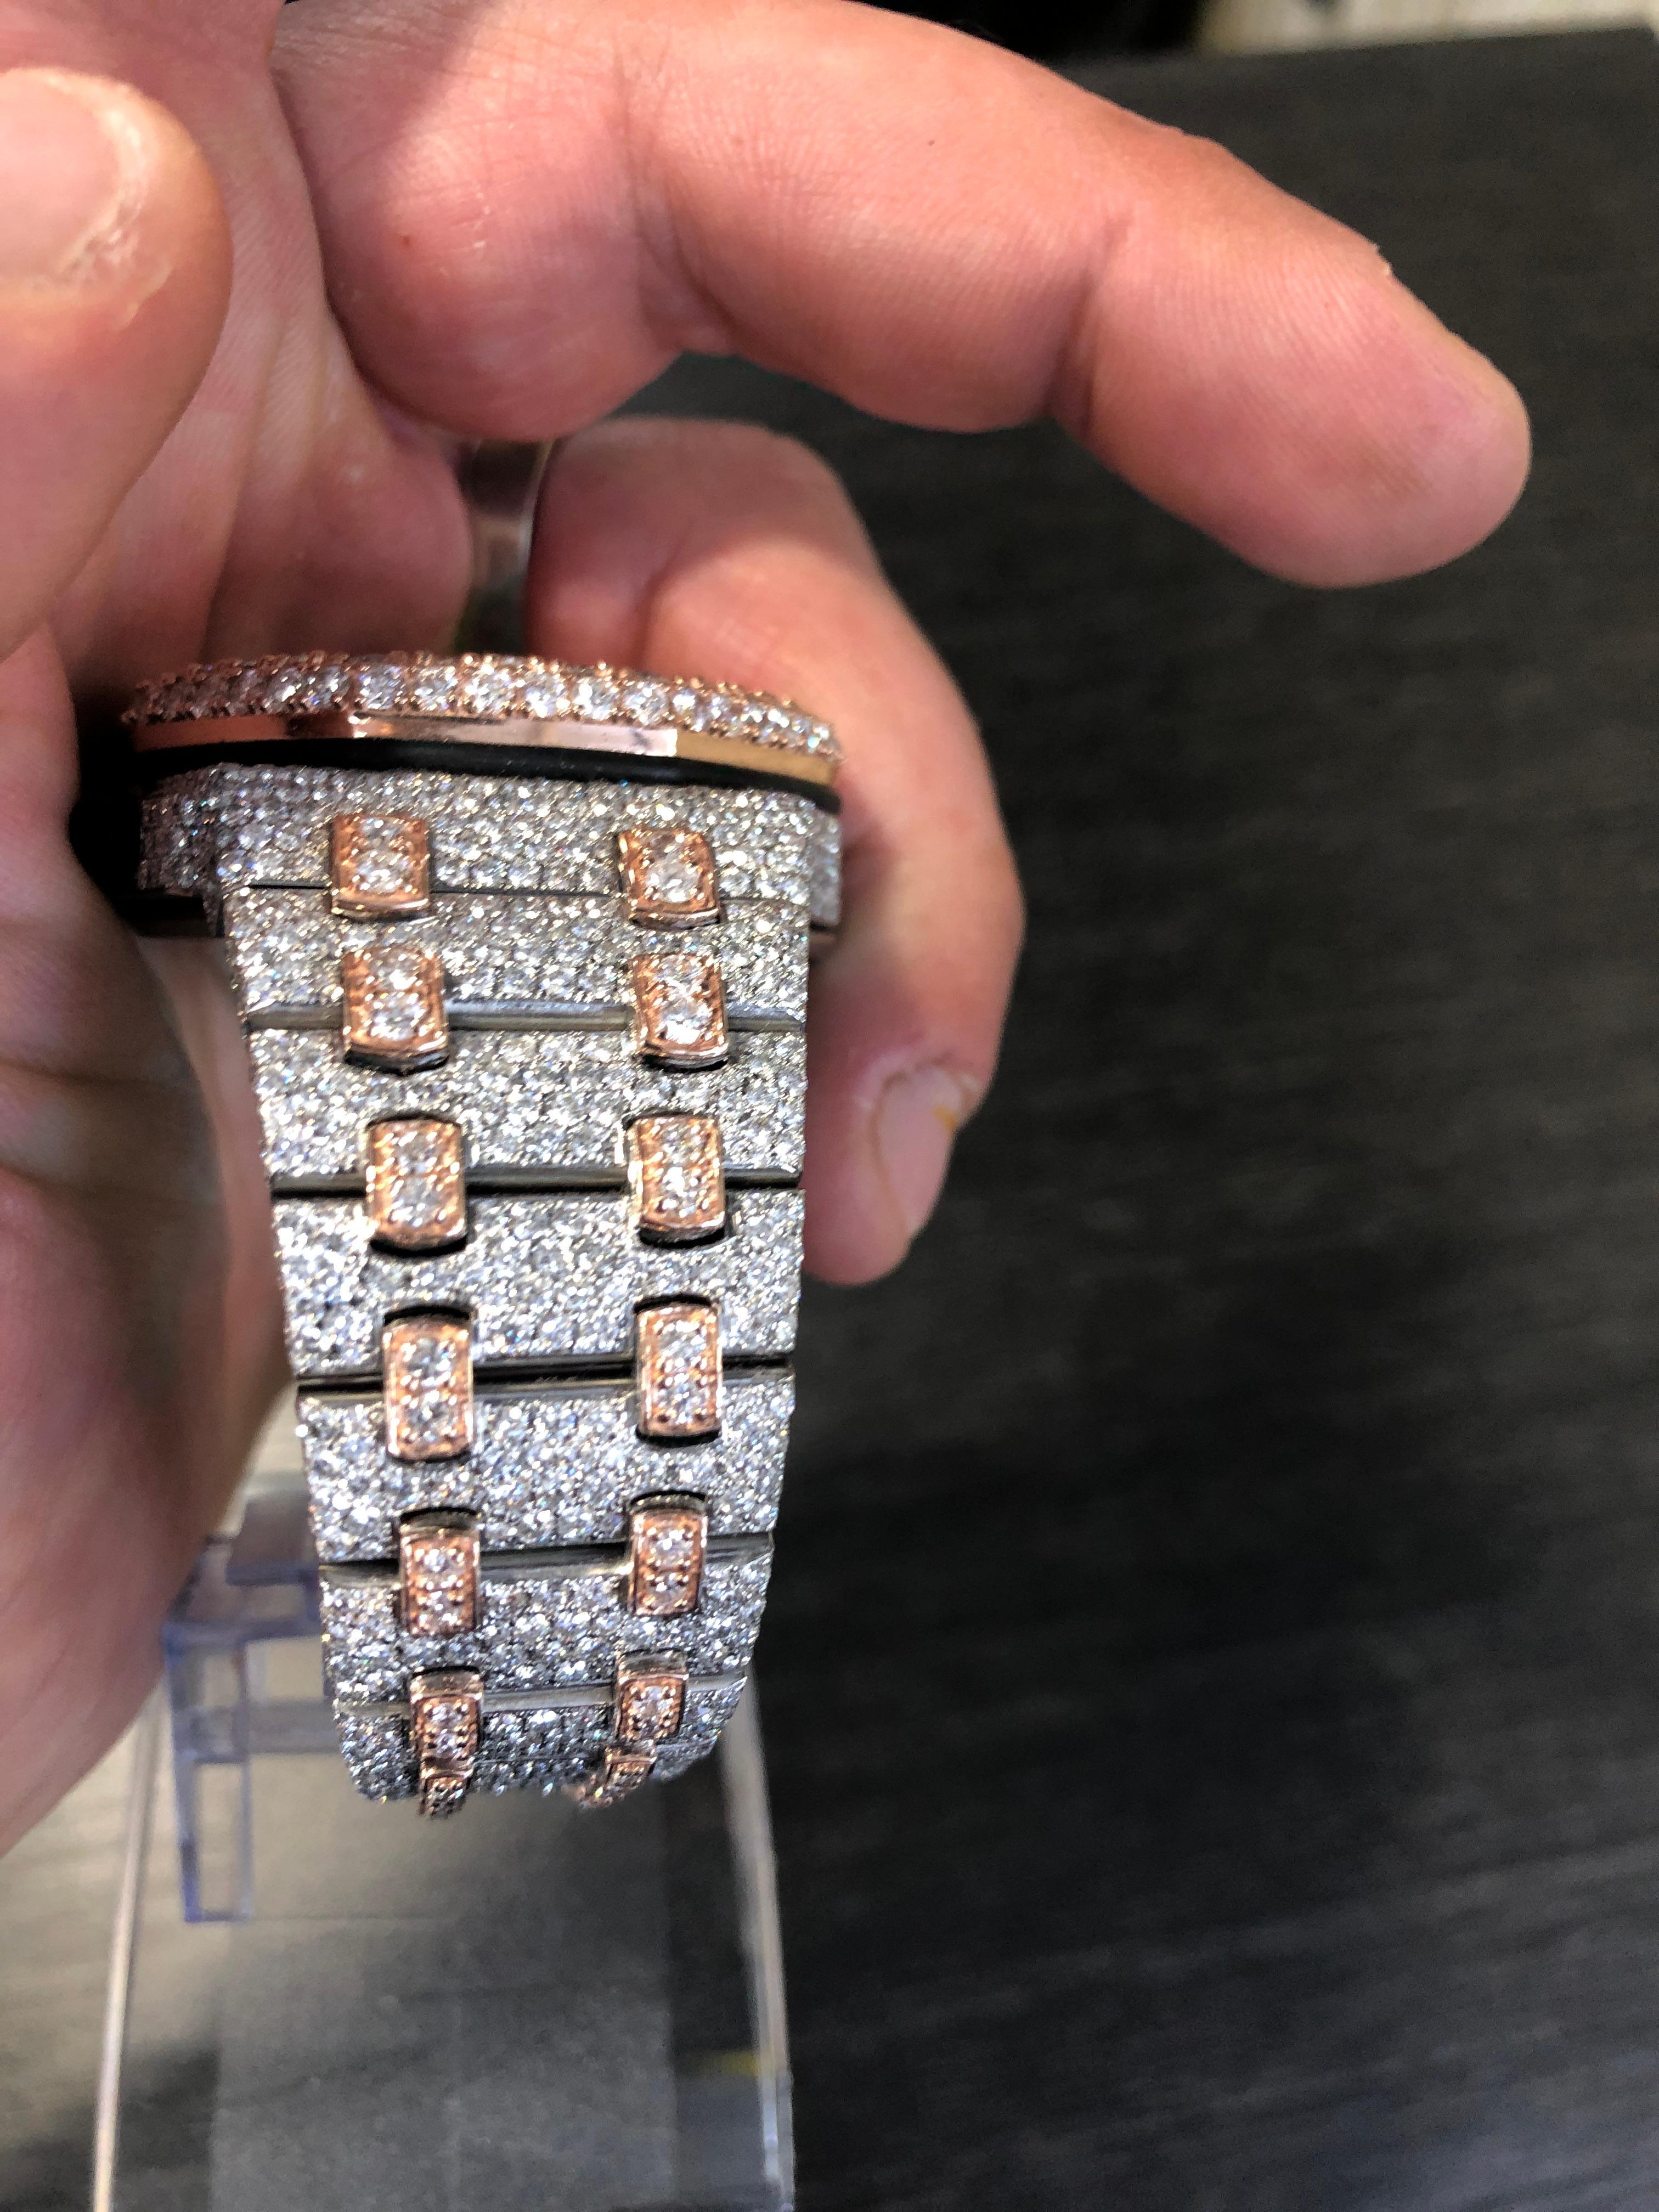 diamond watches for sale